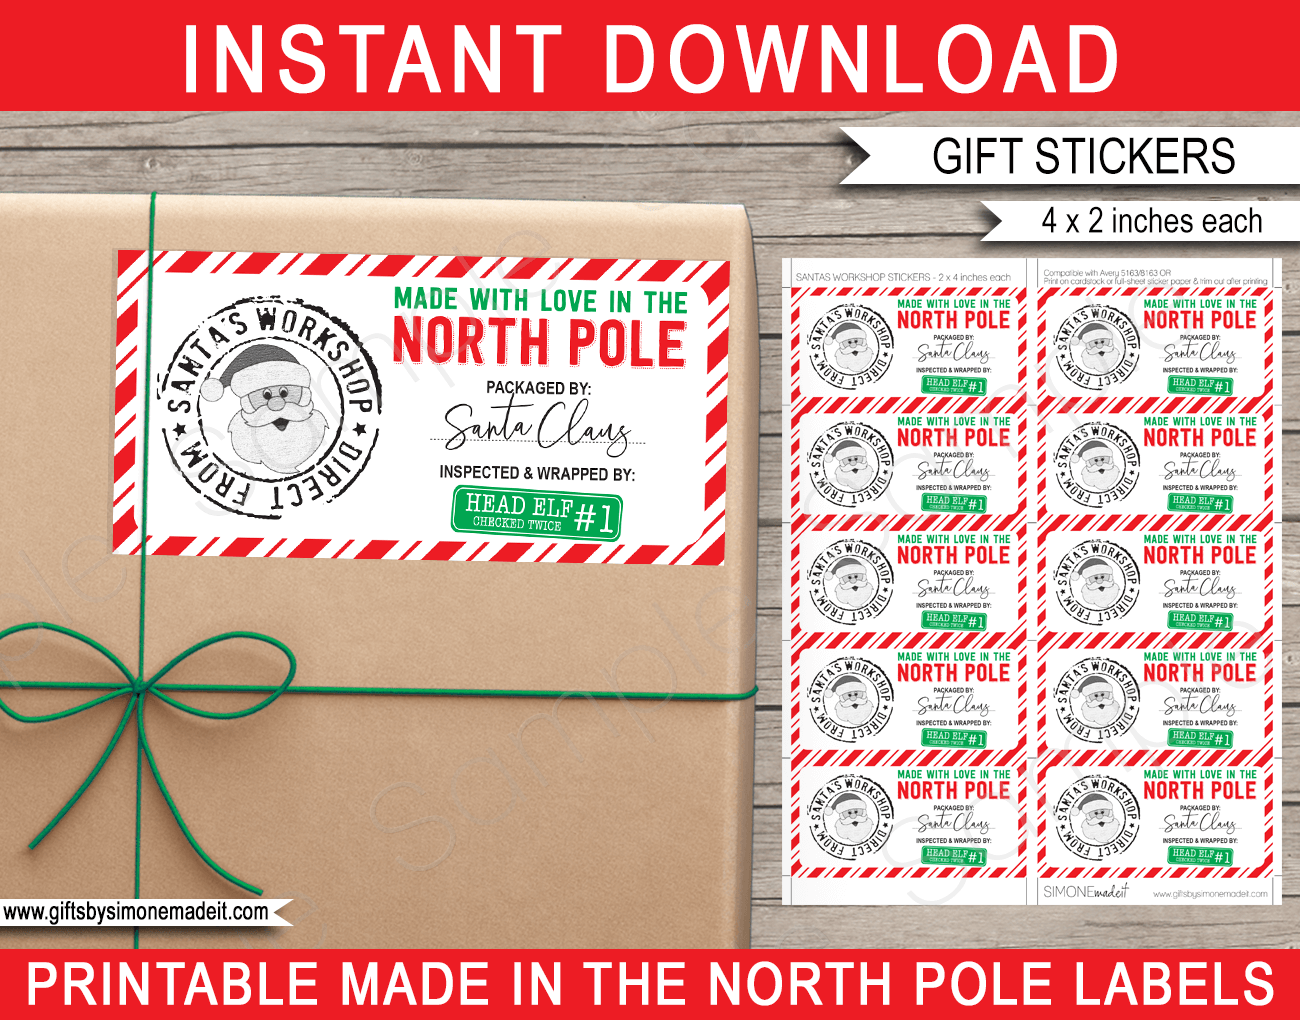 editable-elf-north-pole-shipping-labels-santa-mail-christmas-mail-st